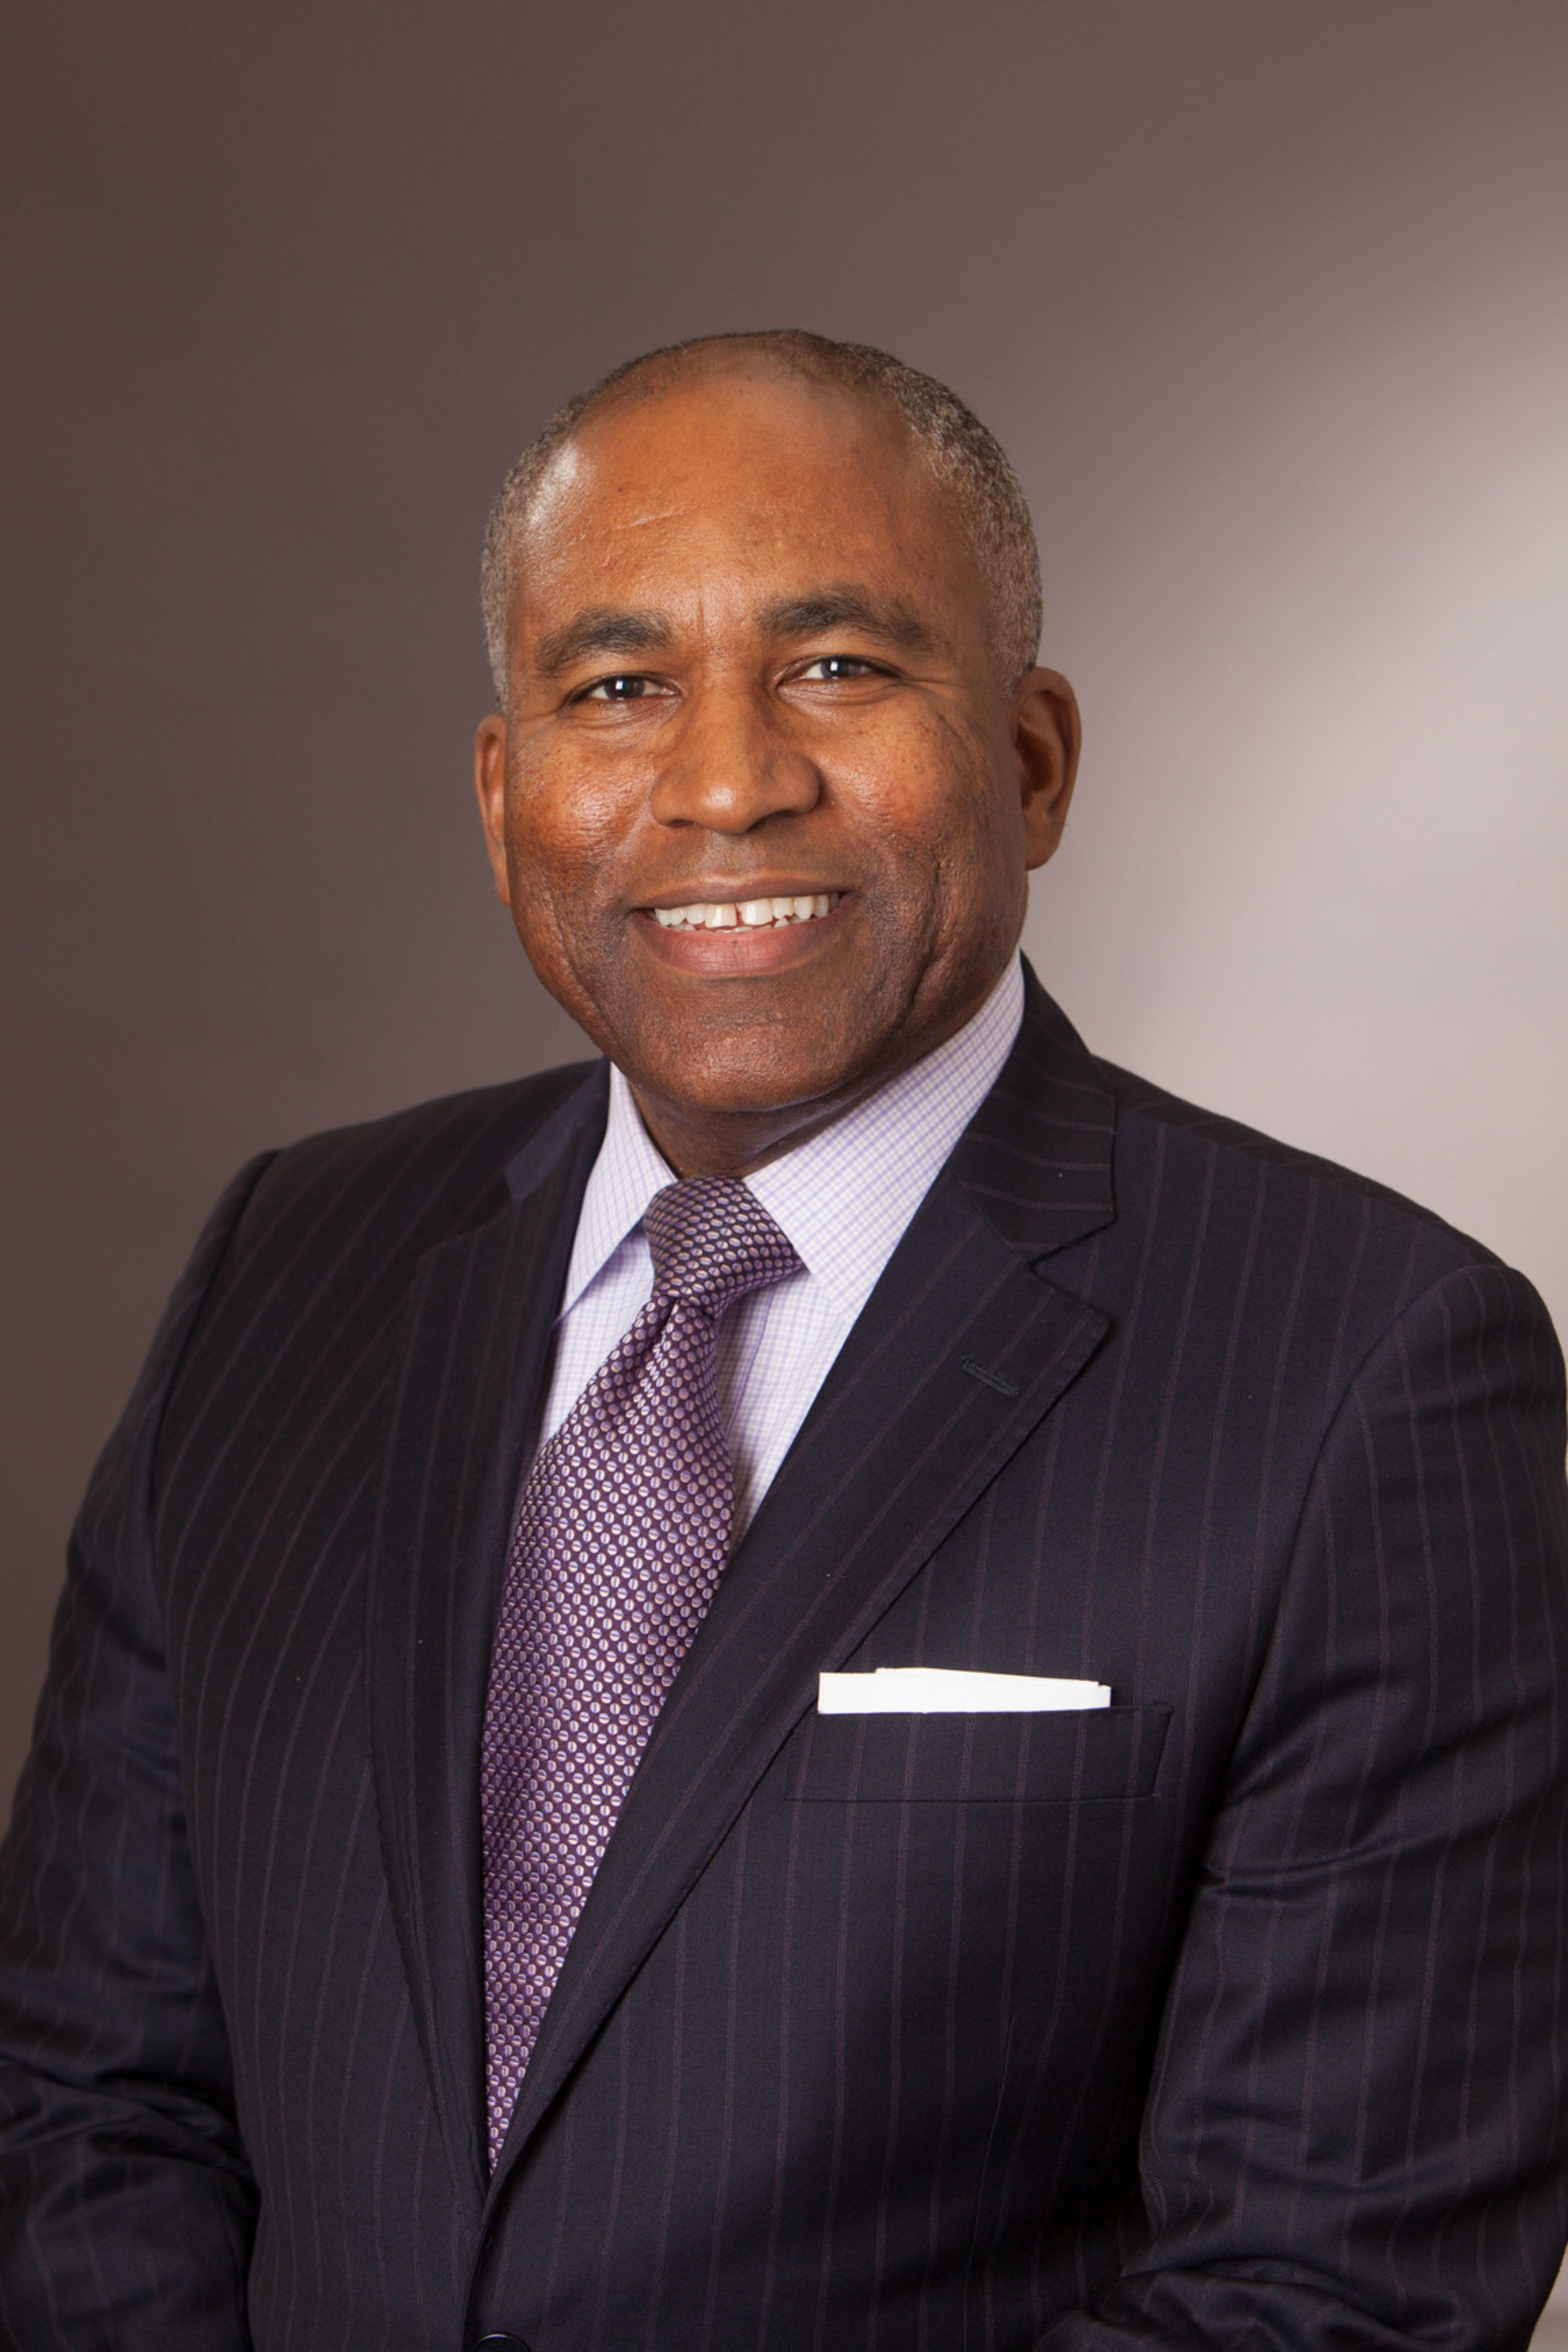 Marc A. Howze is appointed Senior Vice President and Chief Administrative Officer at Deere & Company, effective November 1